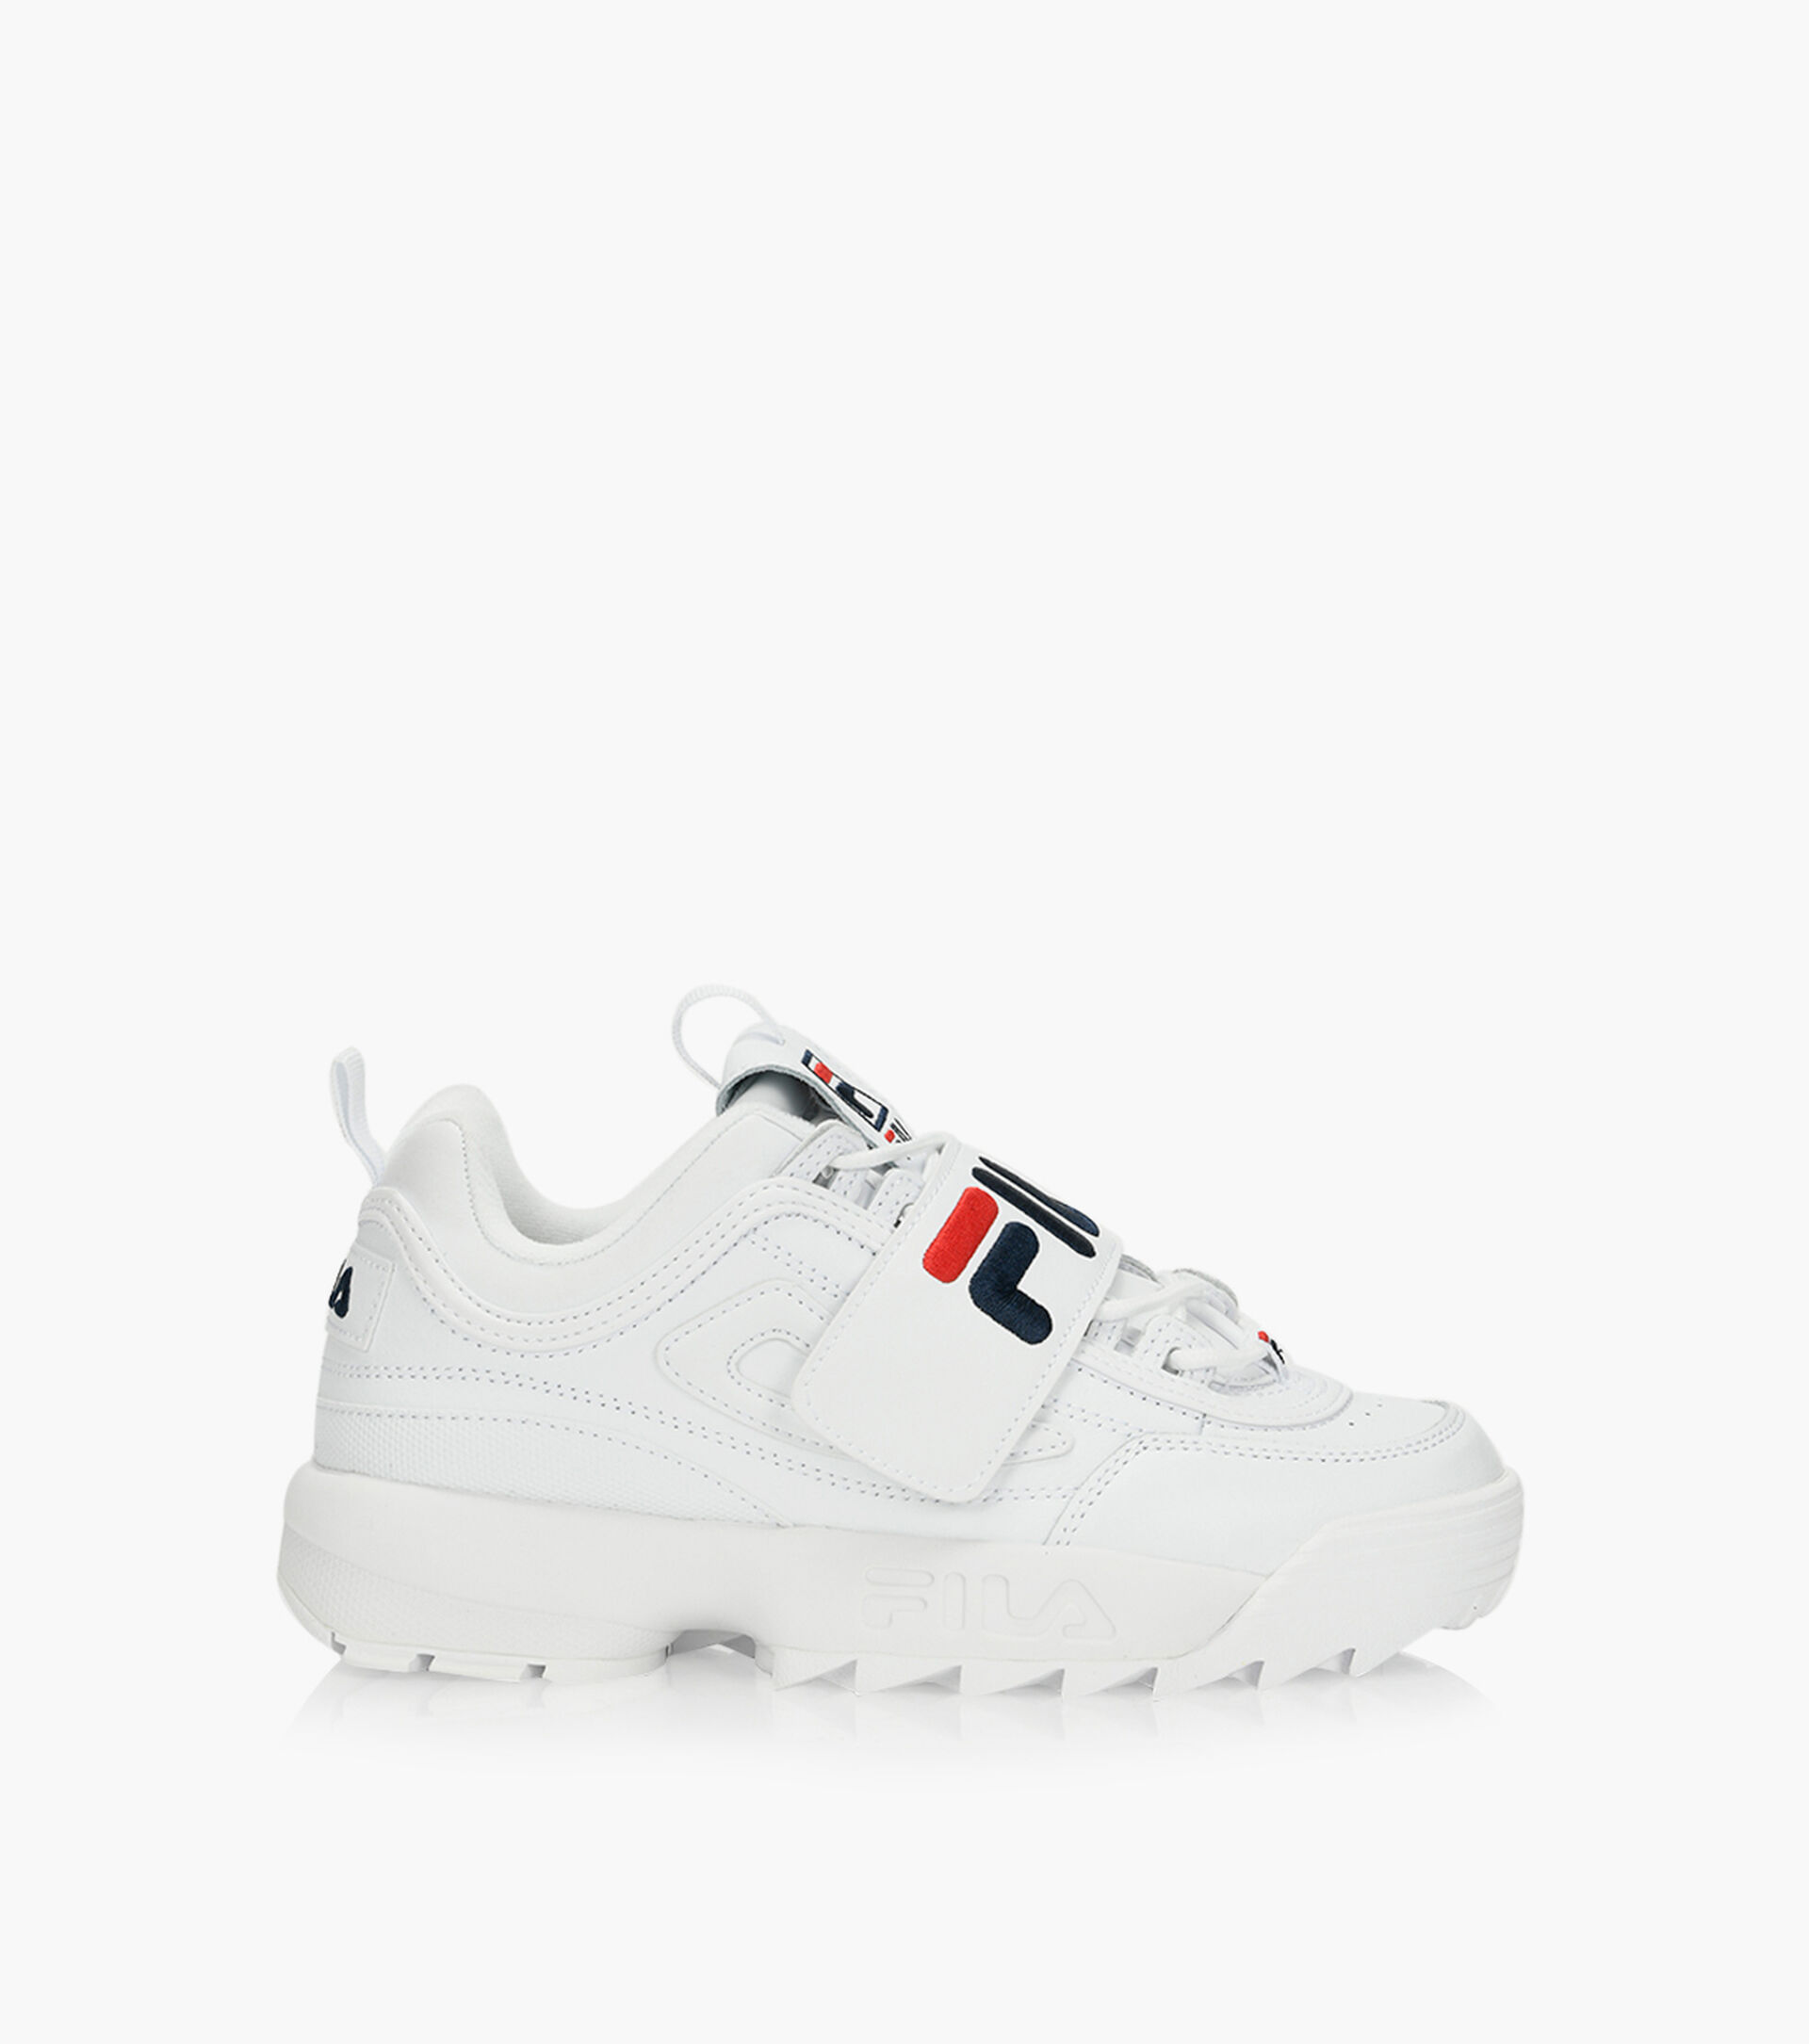 FILA DISRUPTOR II APPLIQUE - White Leather | Browns Shoes